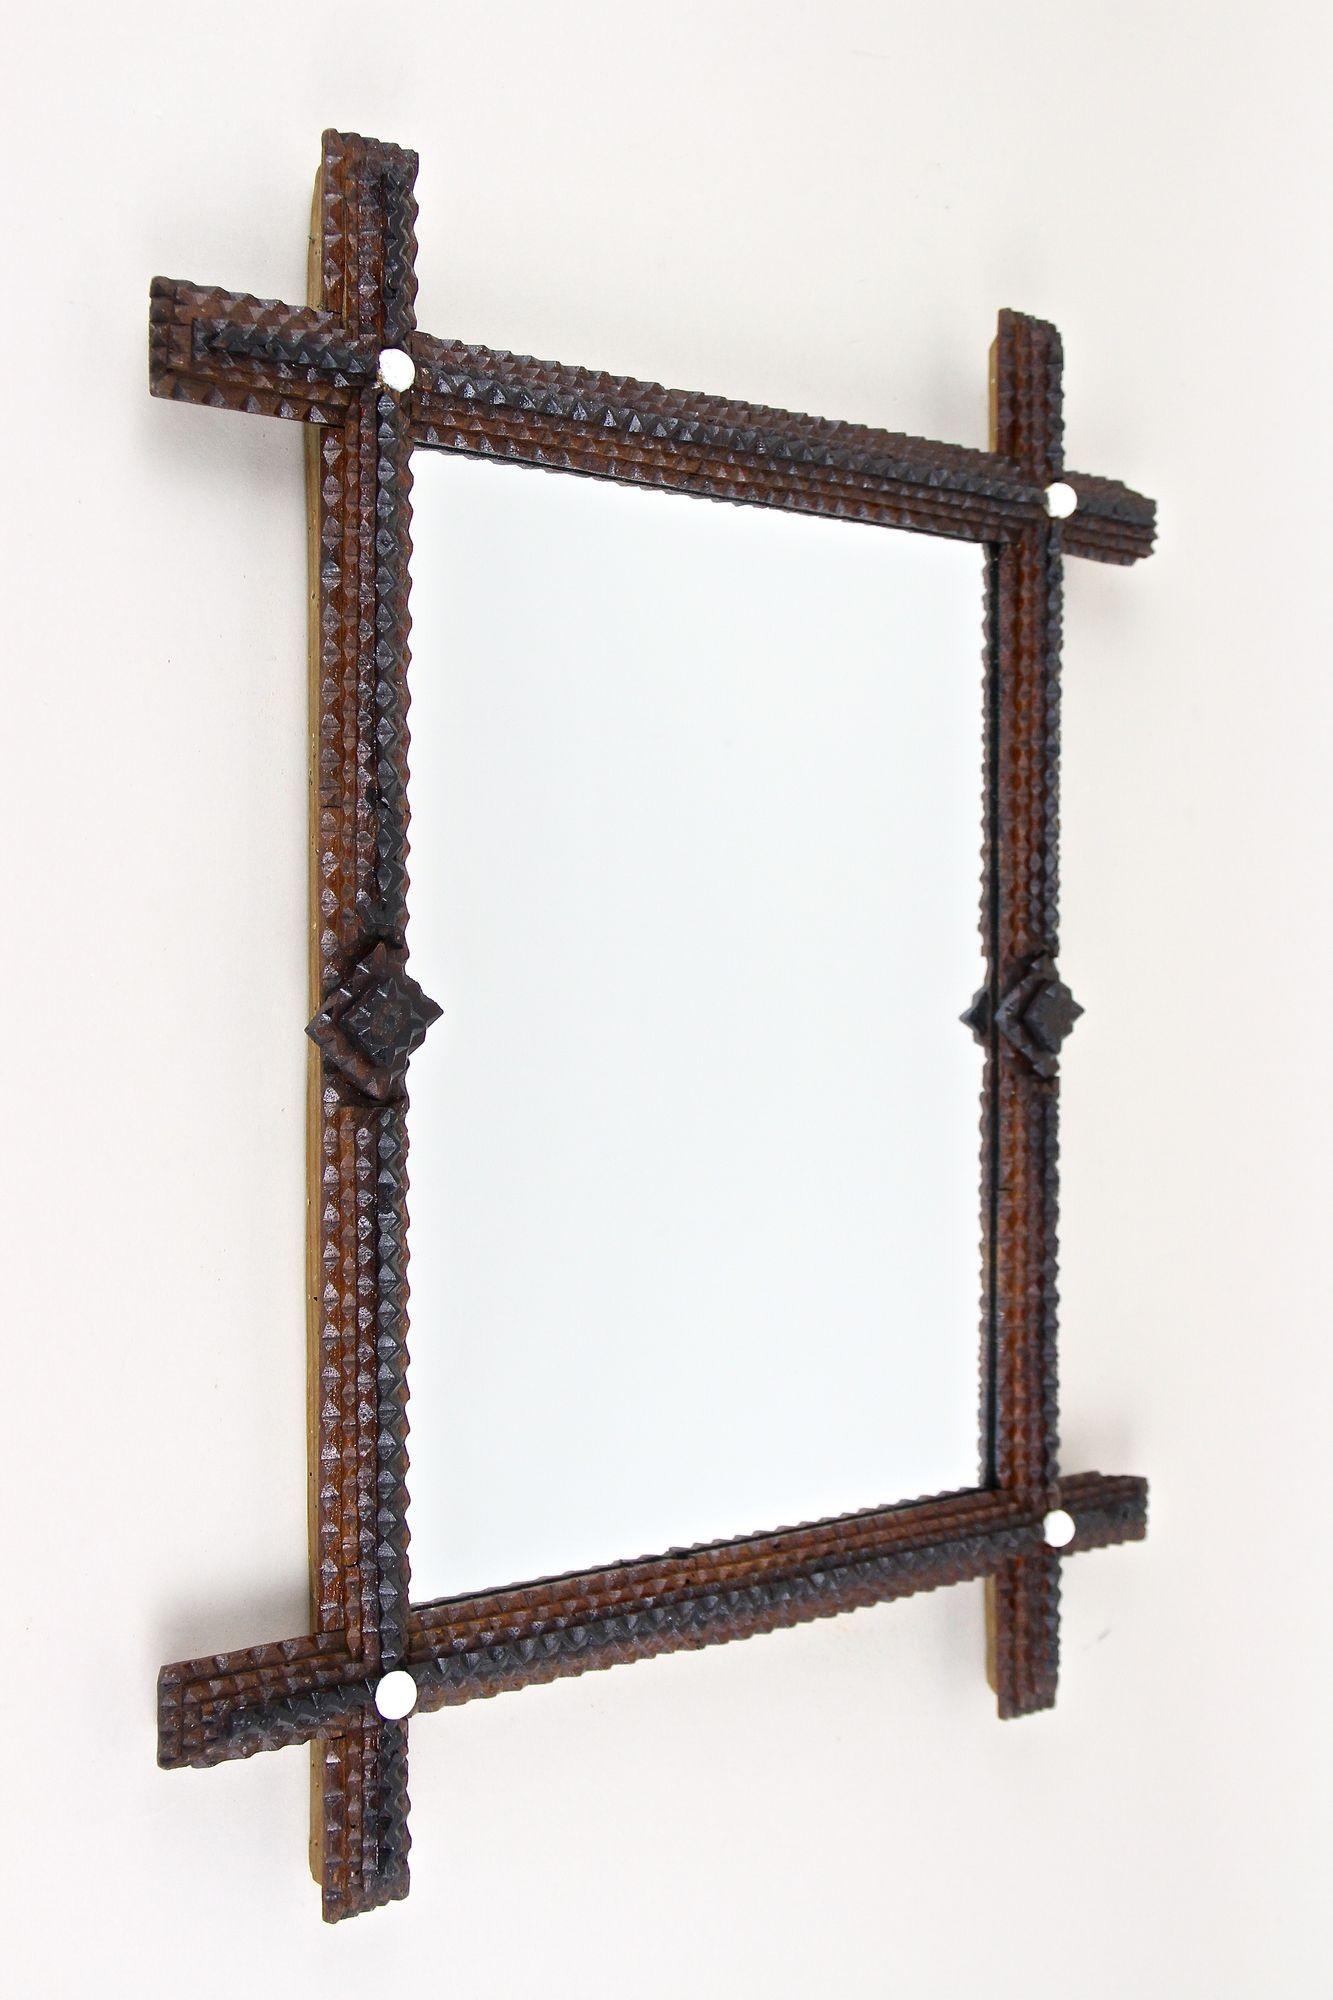 Extraordinary rustic hand carved Tramp Art wall mirror from the late 19th century around 1870 in Austria. Artfully crafted out of basswood, this fantastic looking, pretty old wall mirror shows the famous 